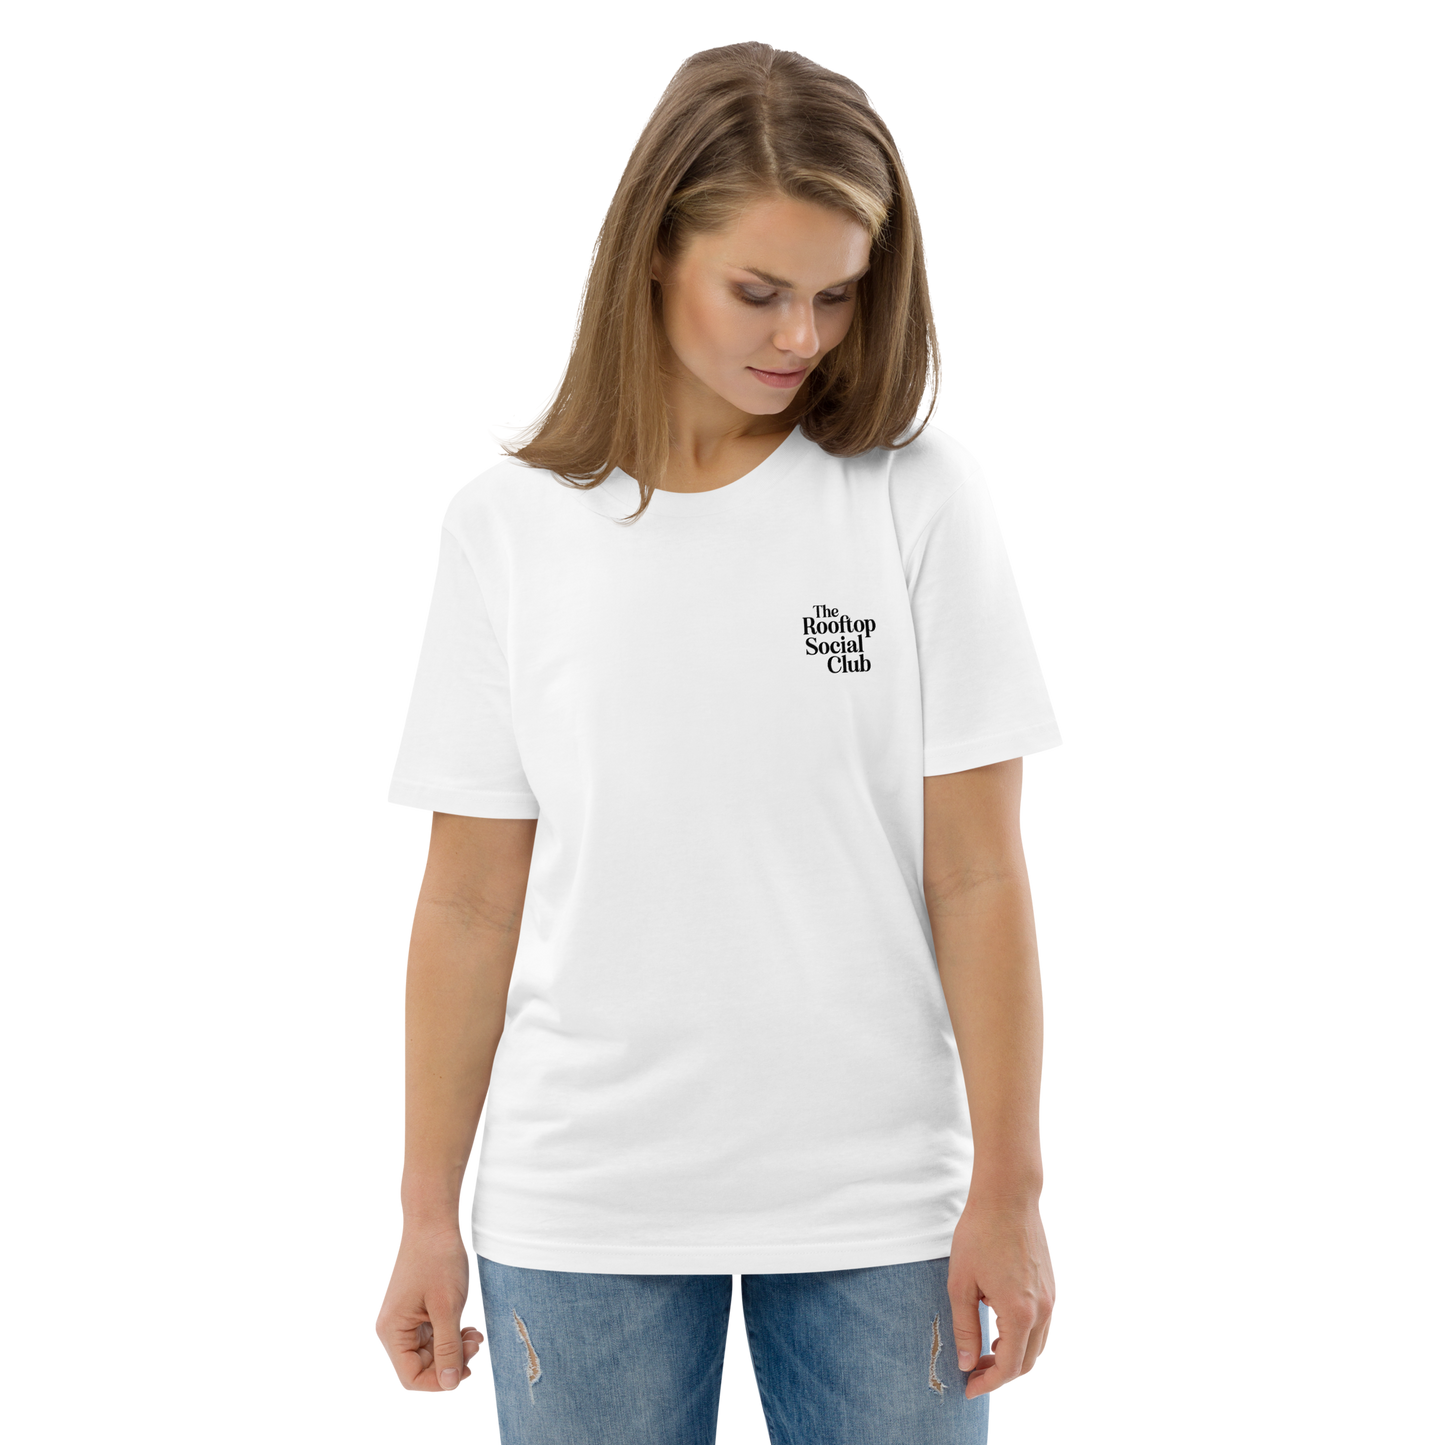 The Rooftop Social Club Graphic Tee